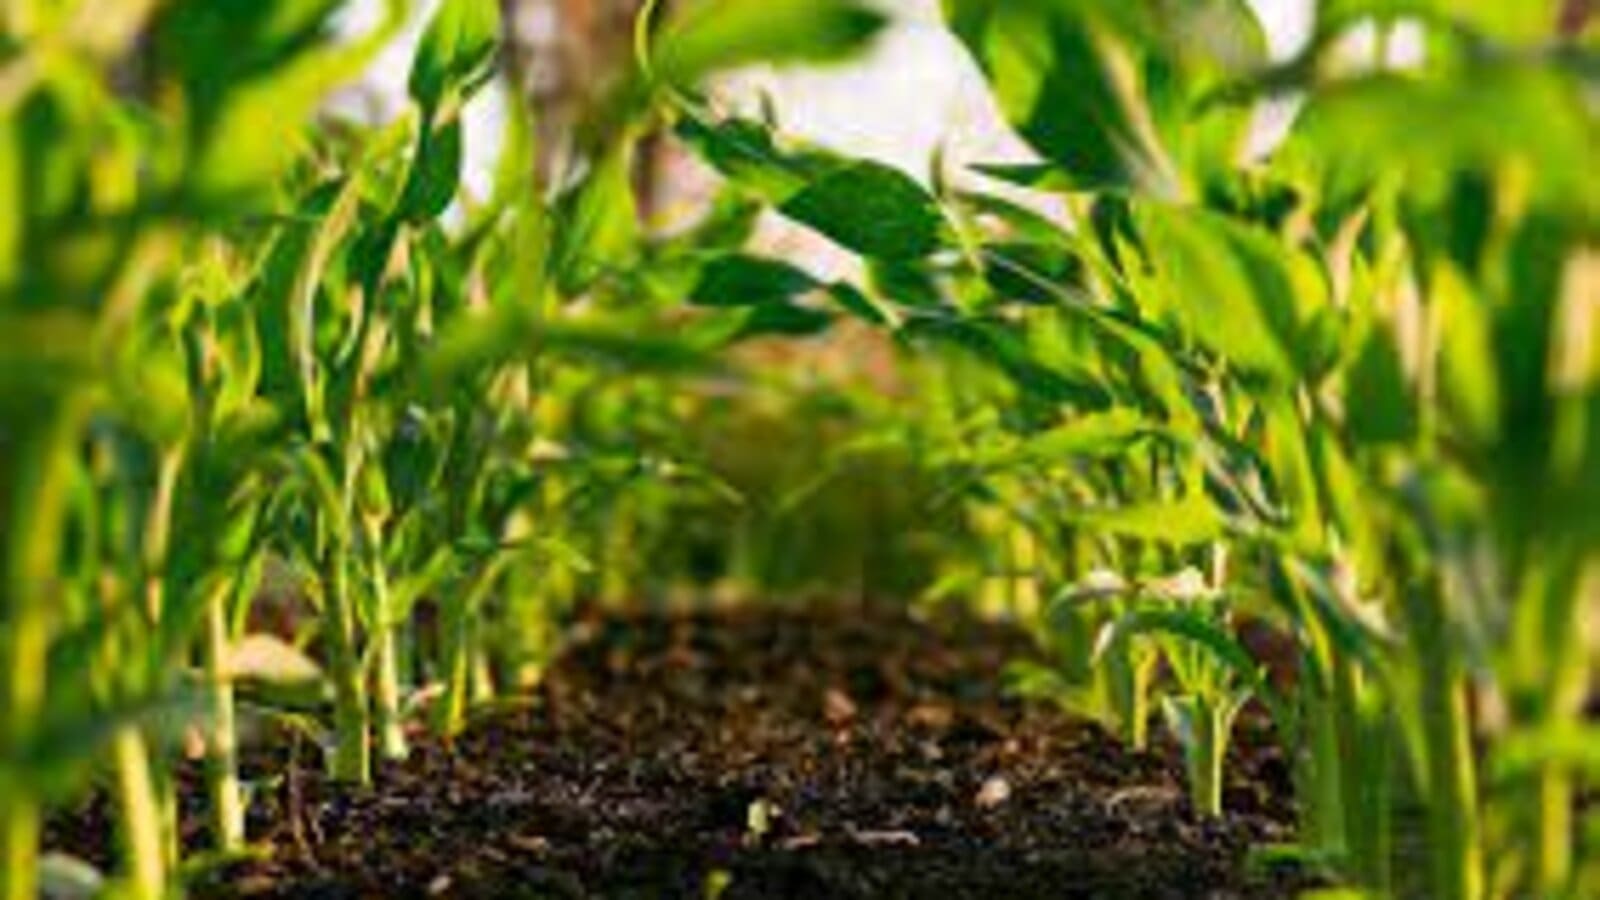 Scoular announces partnership with Regrow to launch regenerative agriculture program